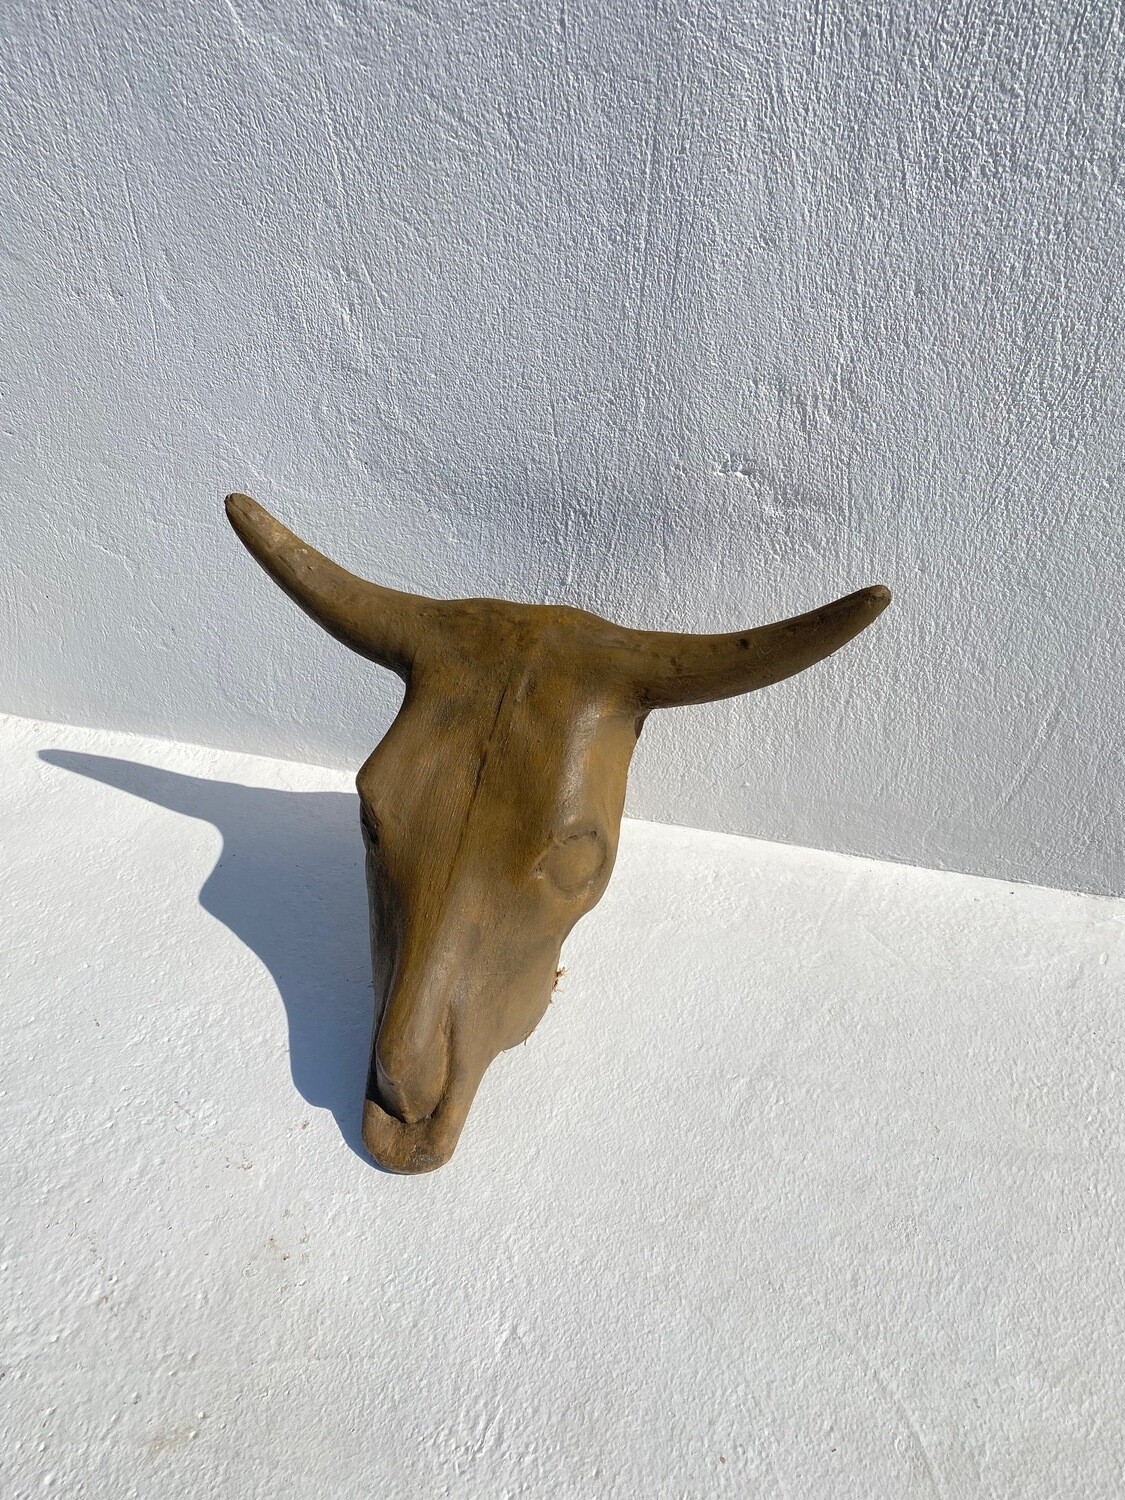 Cattle Head Wall Mount Antique Amber Finish - H400mm x W490mm - 11kg